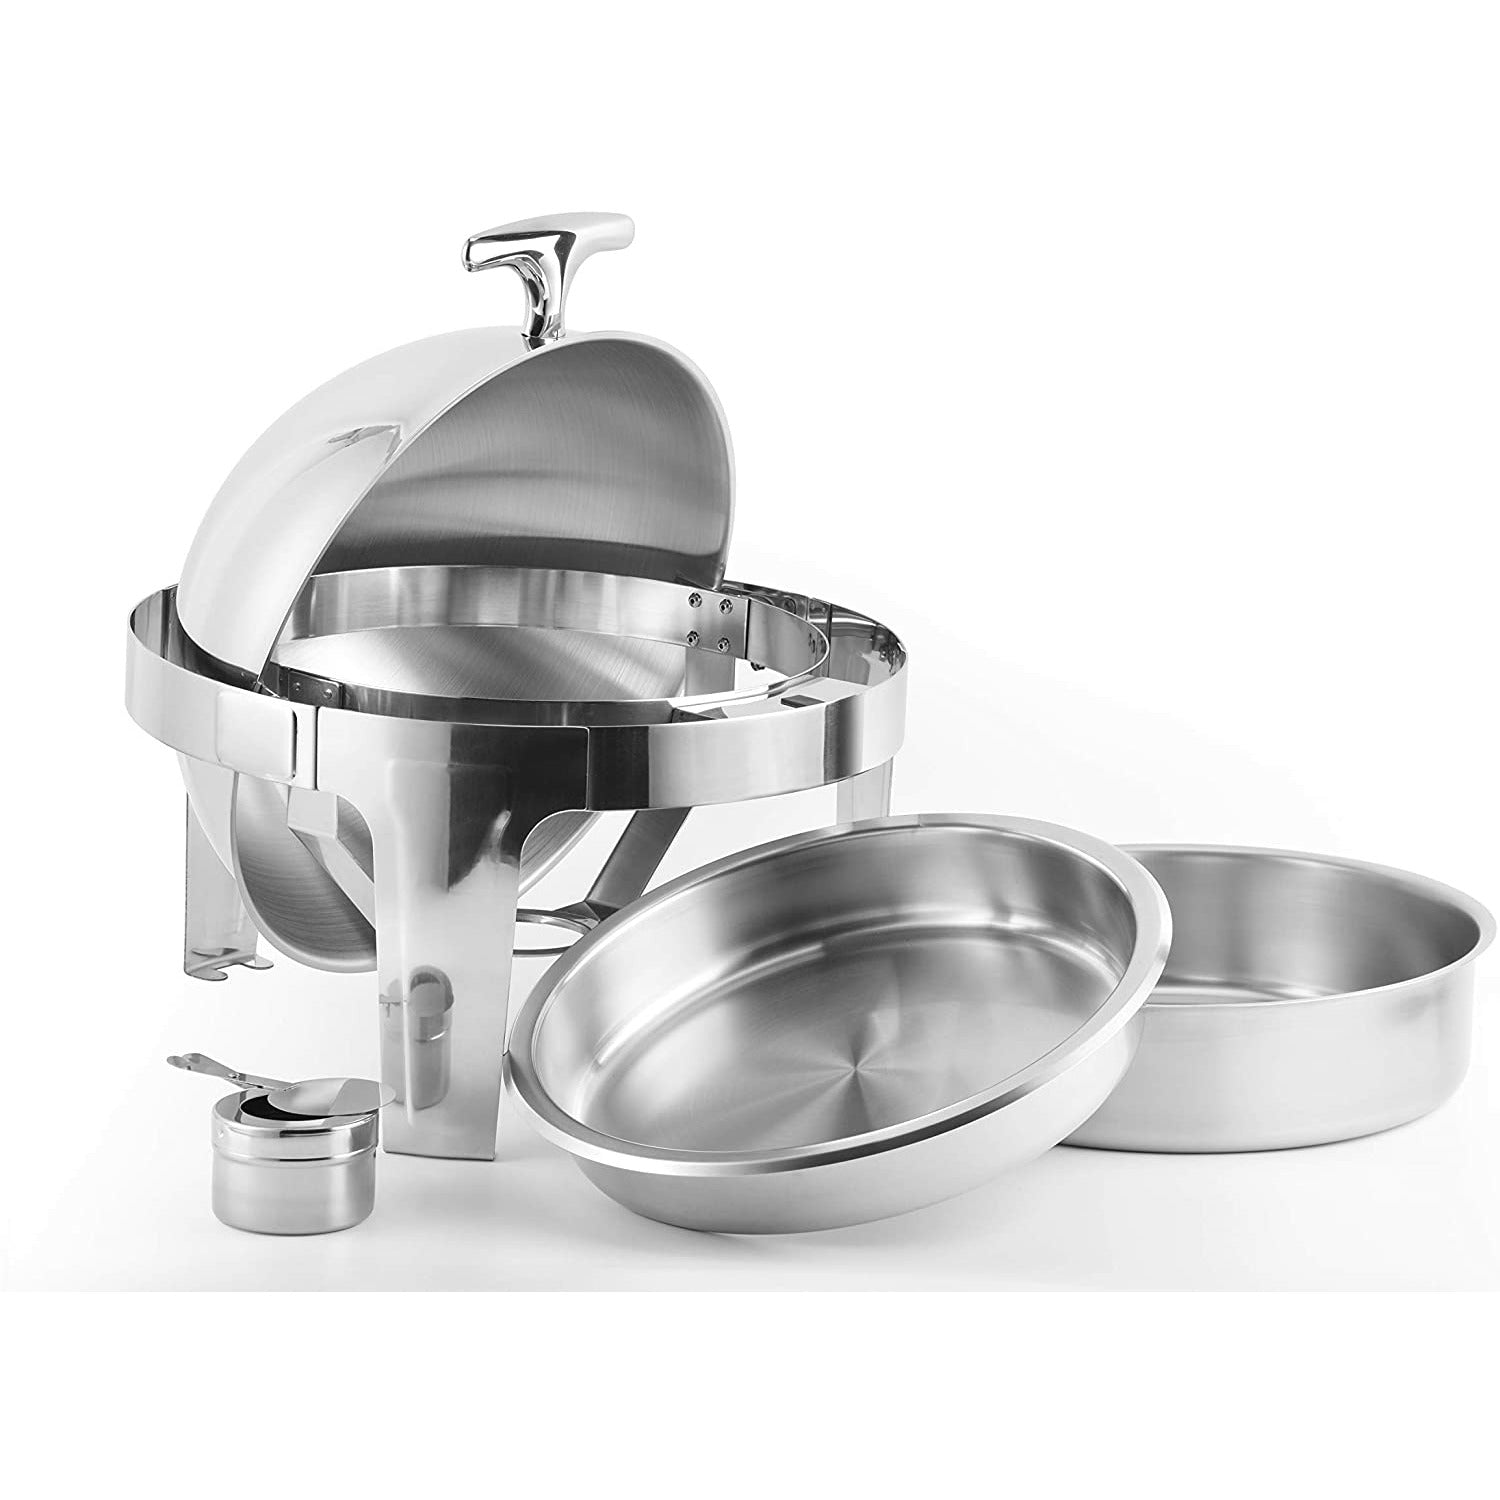 Chafer Chafing Dish Round Roll Top Bundle Stainless Steel 6 Quart (2-Pack)